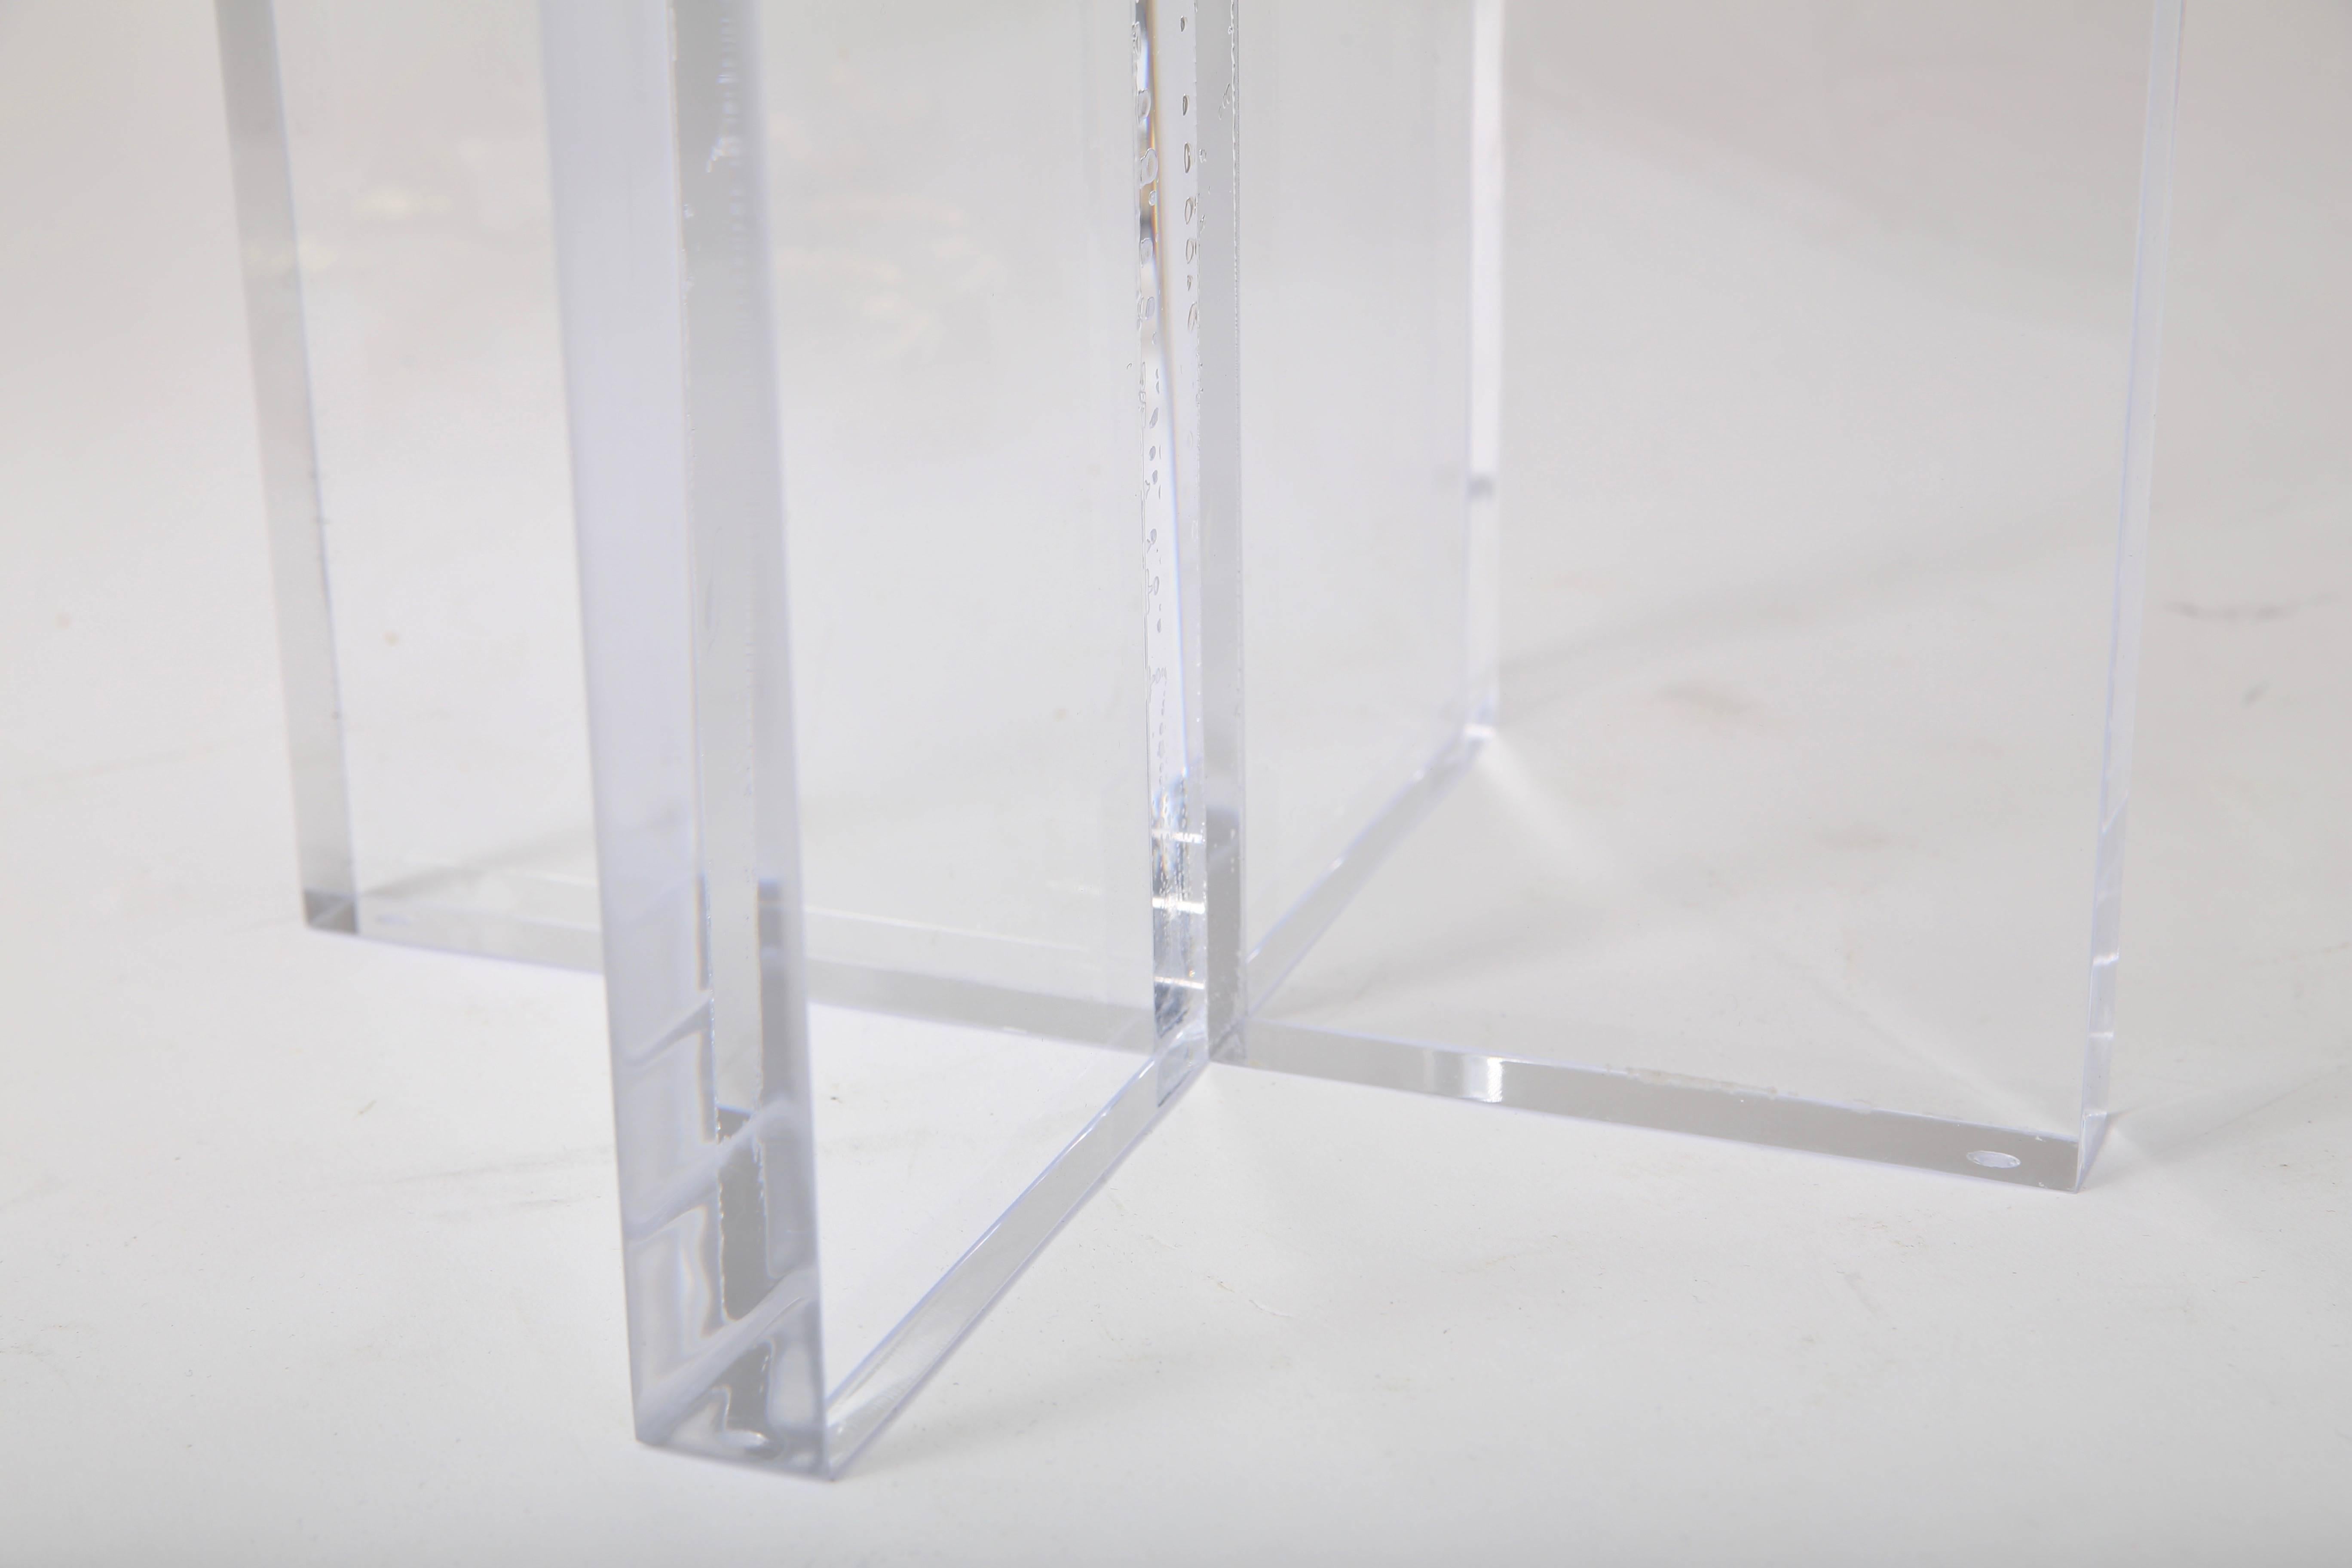 American Pair of Lucite Side Tables